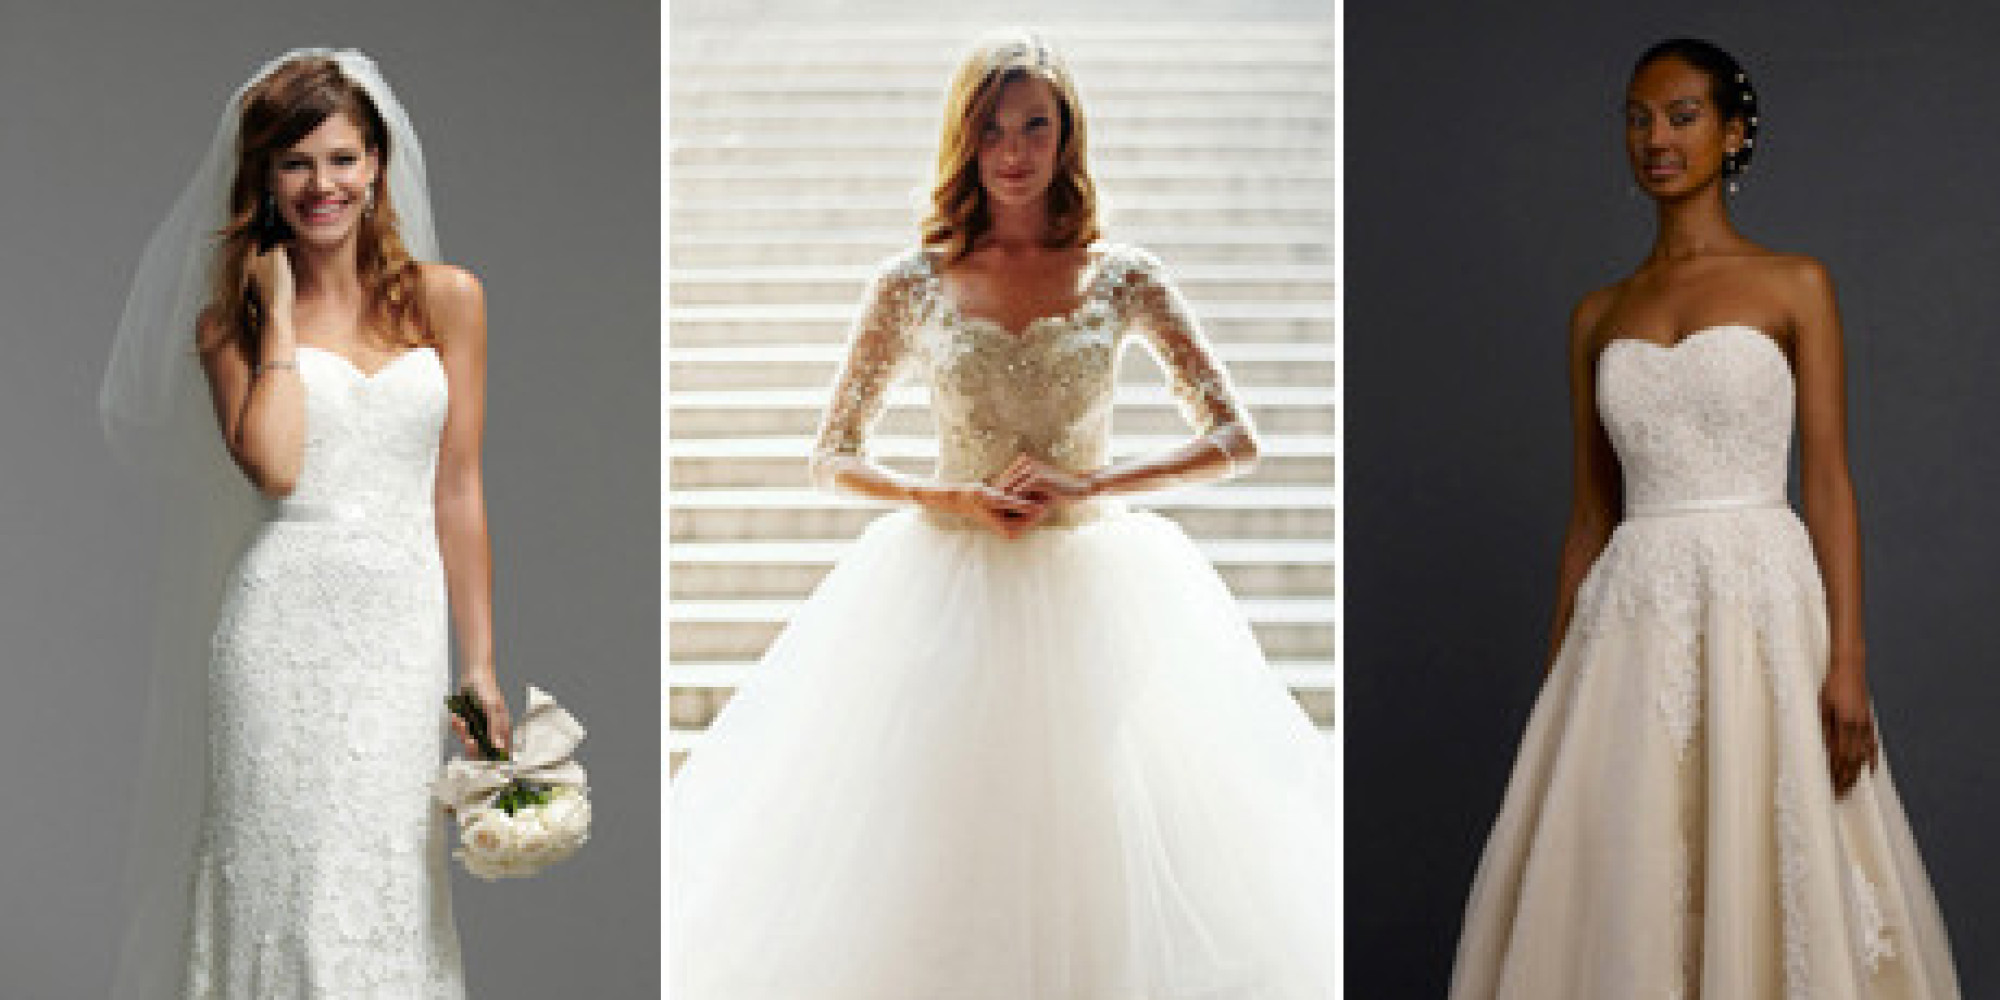 The 25 Most-Pinned Wedding Dresses Of 2014 | HuffPost